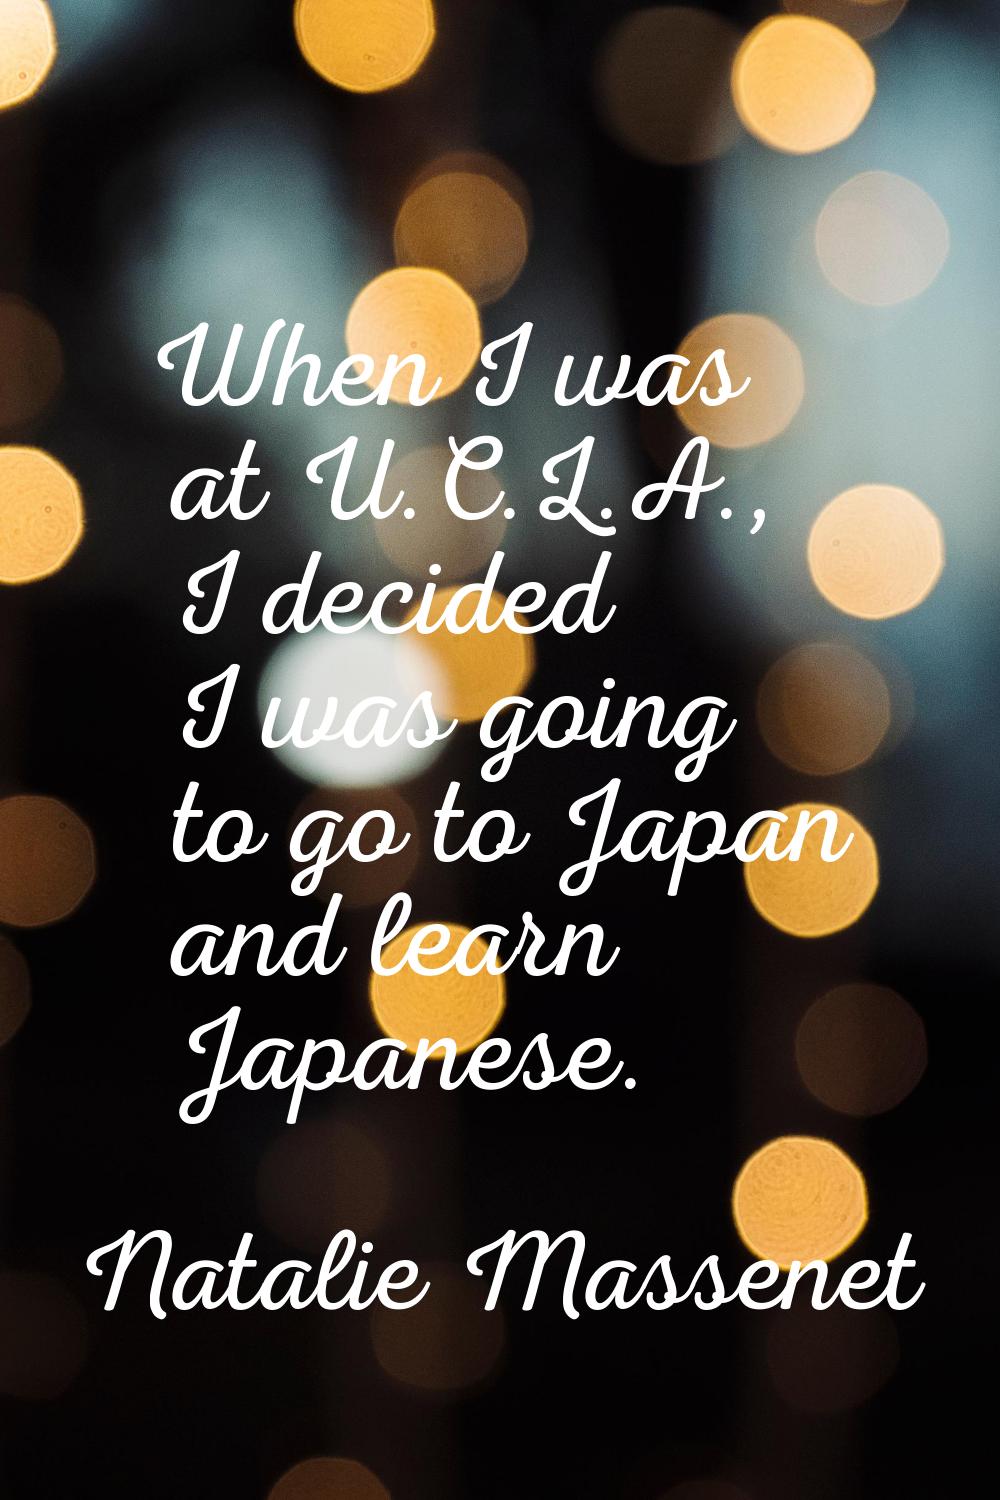 When I was at U.C.L.A., I decided I was going to go to Japan and learn Japanese.